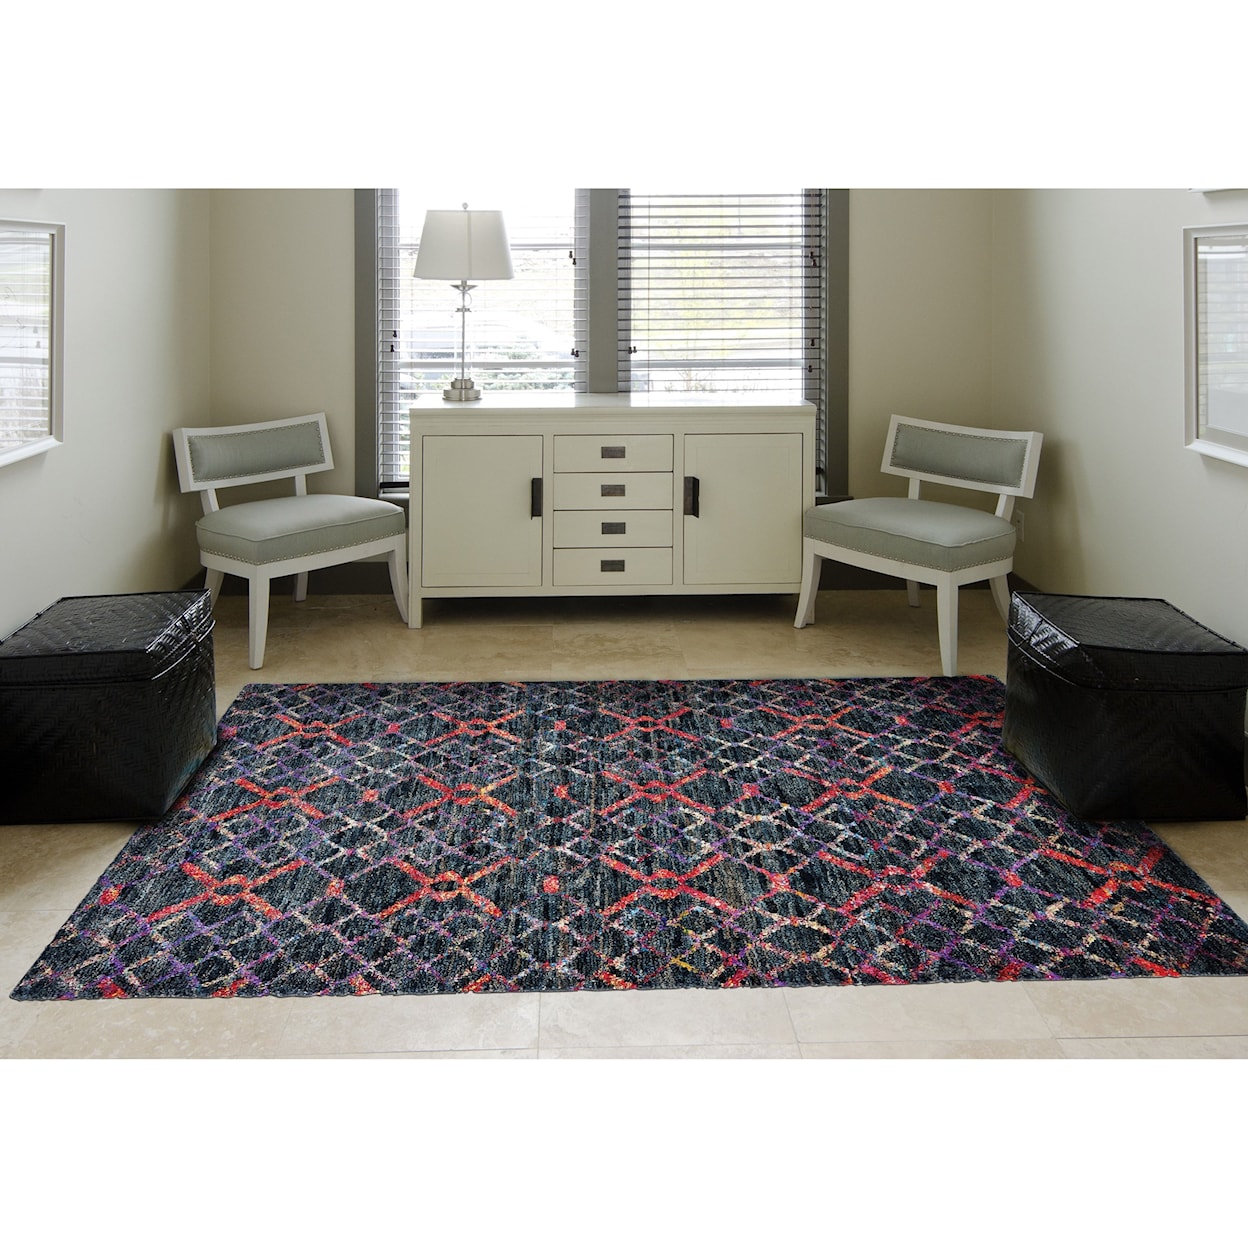 Feizy Rugs Tortola Flame 2' x 3' Area Rug